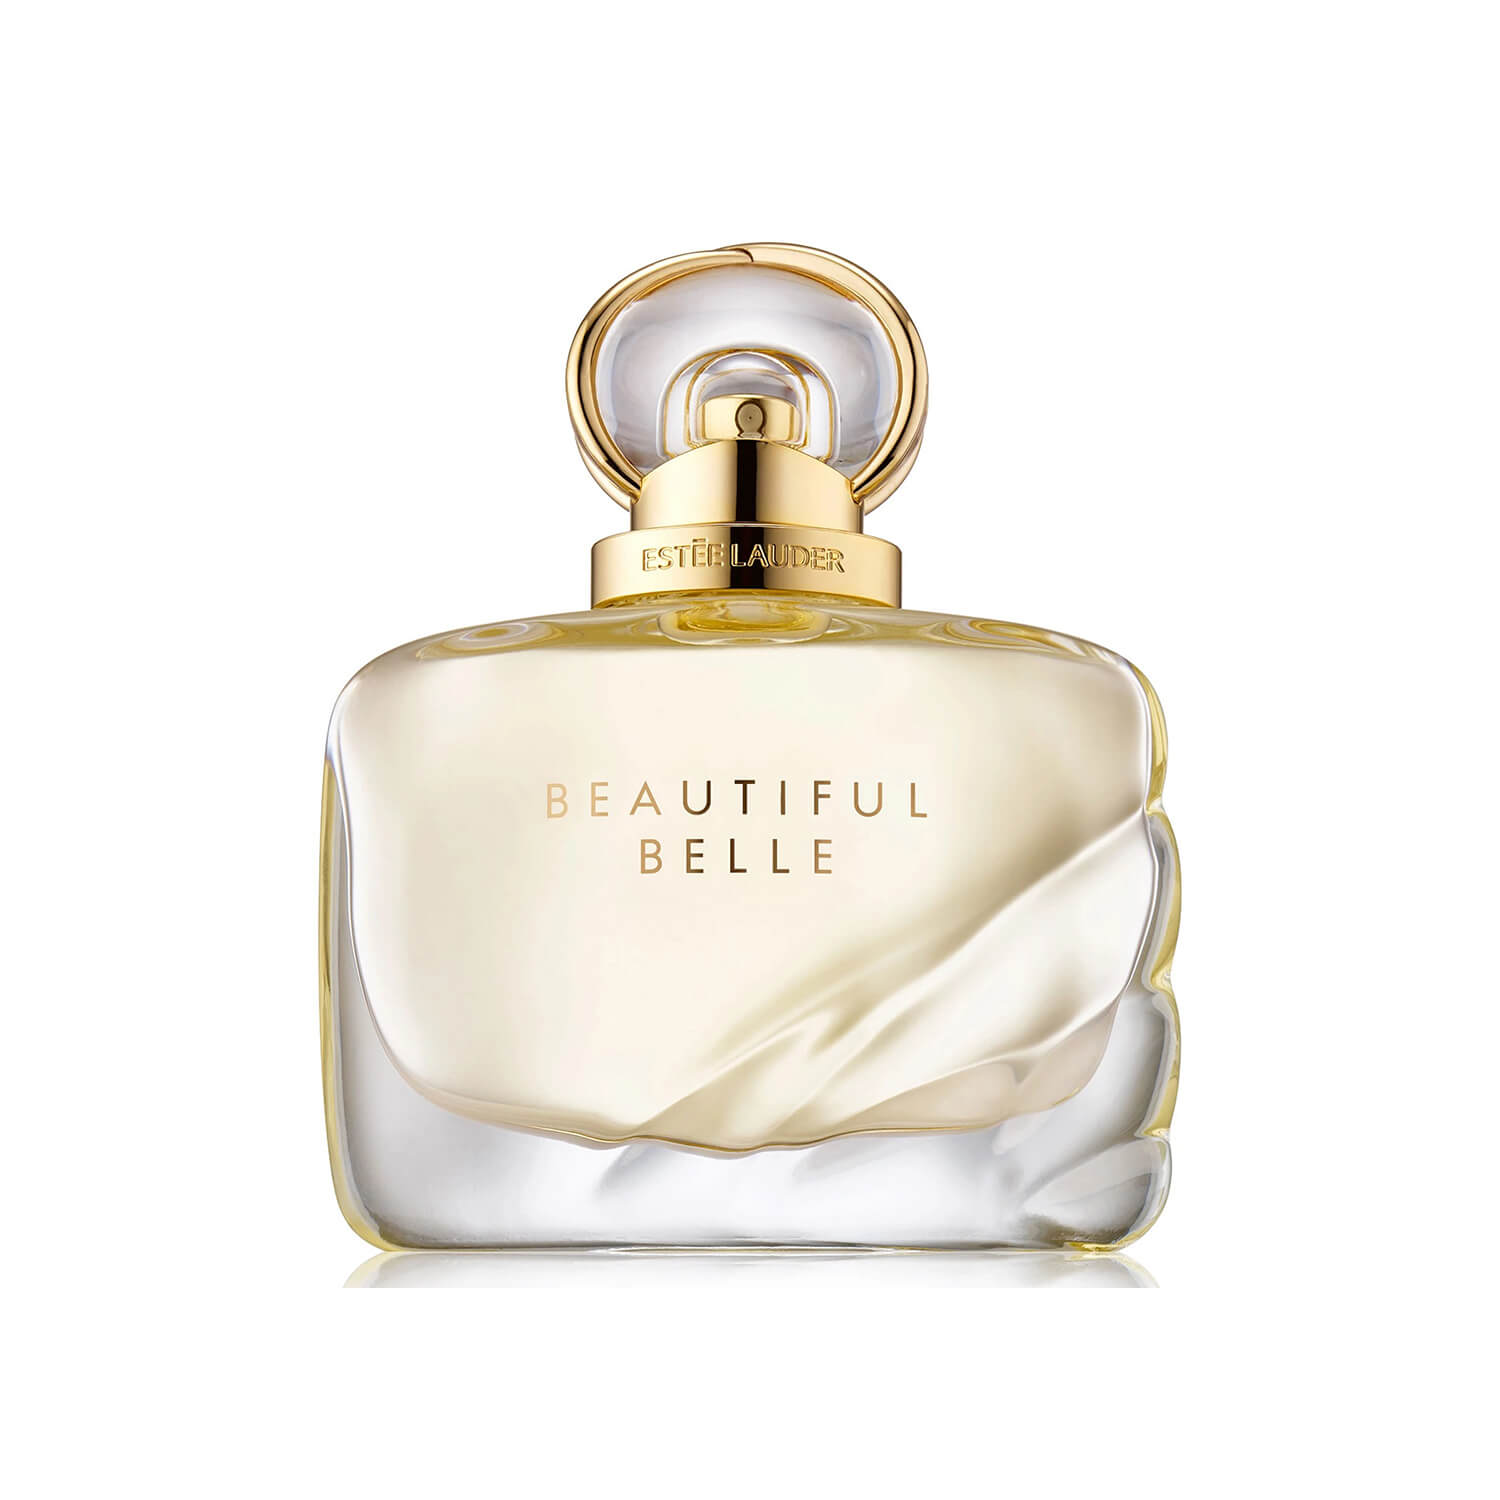 Estee Lauder Eau de Parfum Beautiful Belle 30ml now available at Heygirl.pk with delivery in Karachi, Lahore, Islamabad and Pakistan